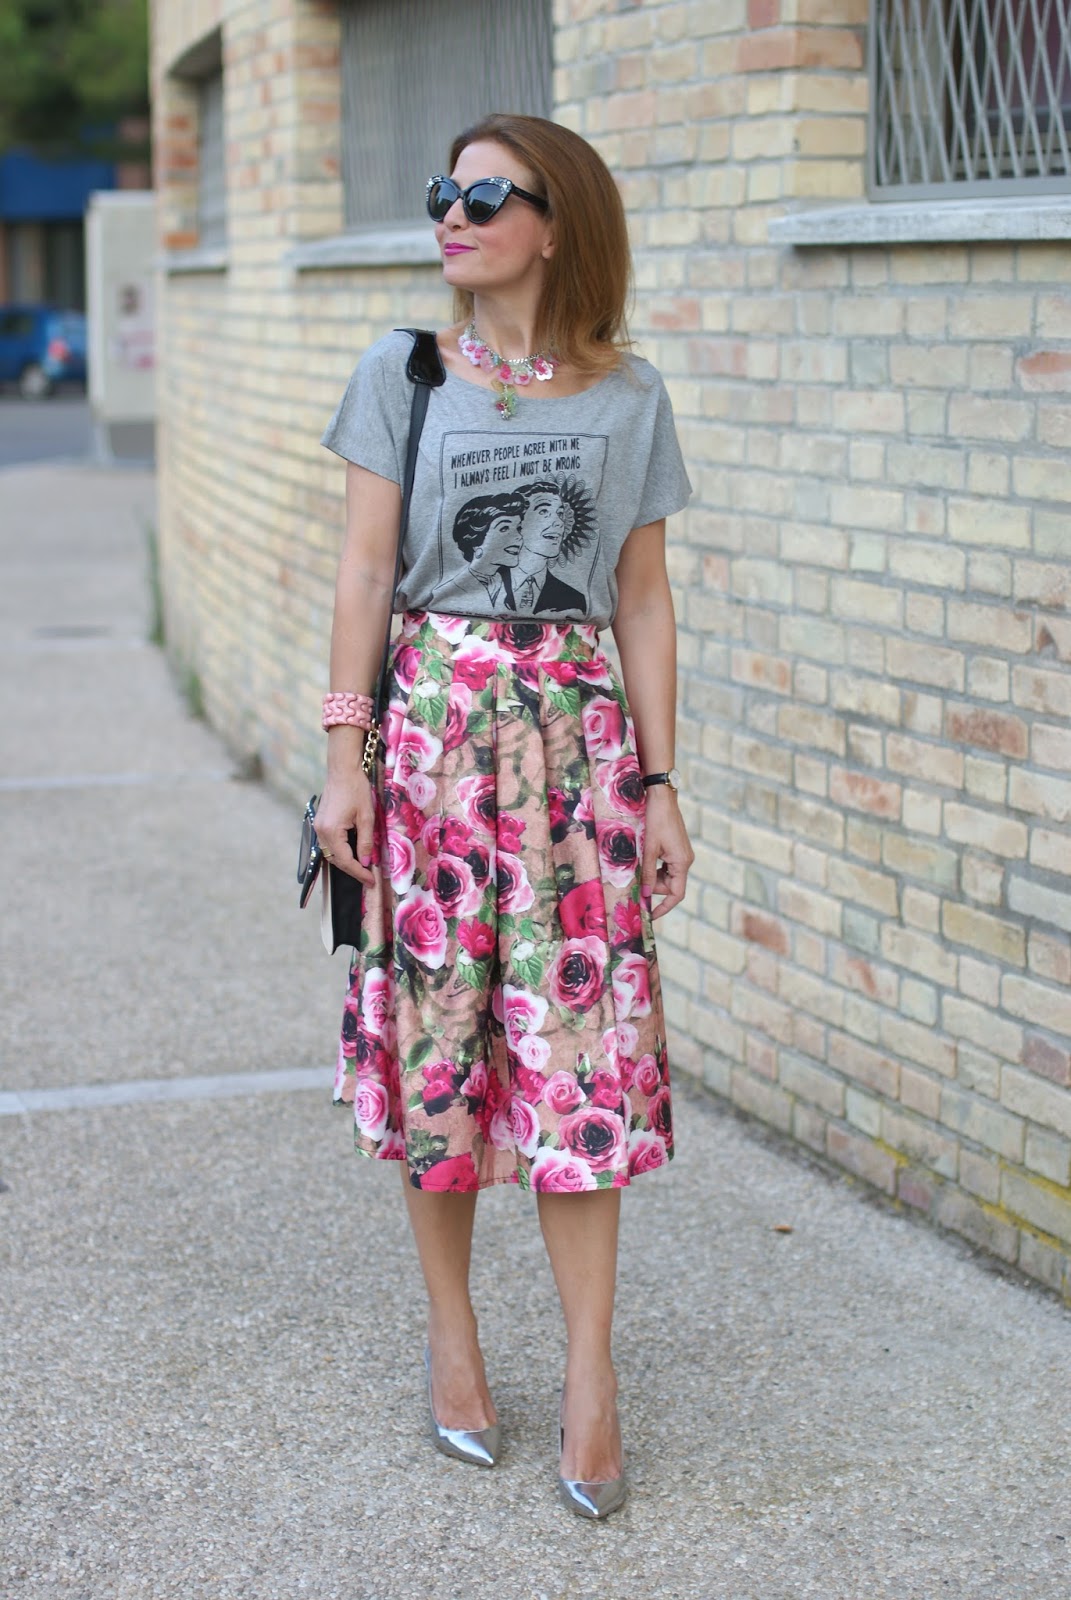 Opposes Complementaires t-shirt con midi skirt con rose su Fashion and Cookies fashion blog, fashion blogger style